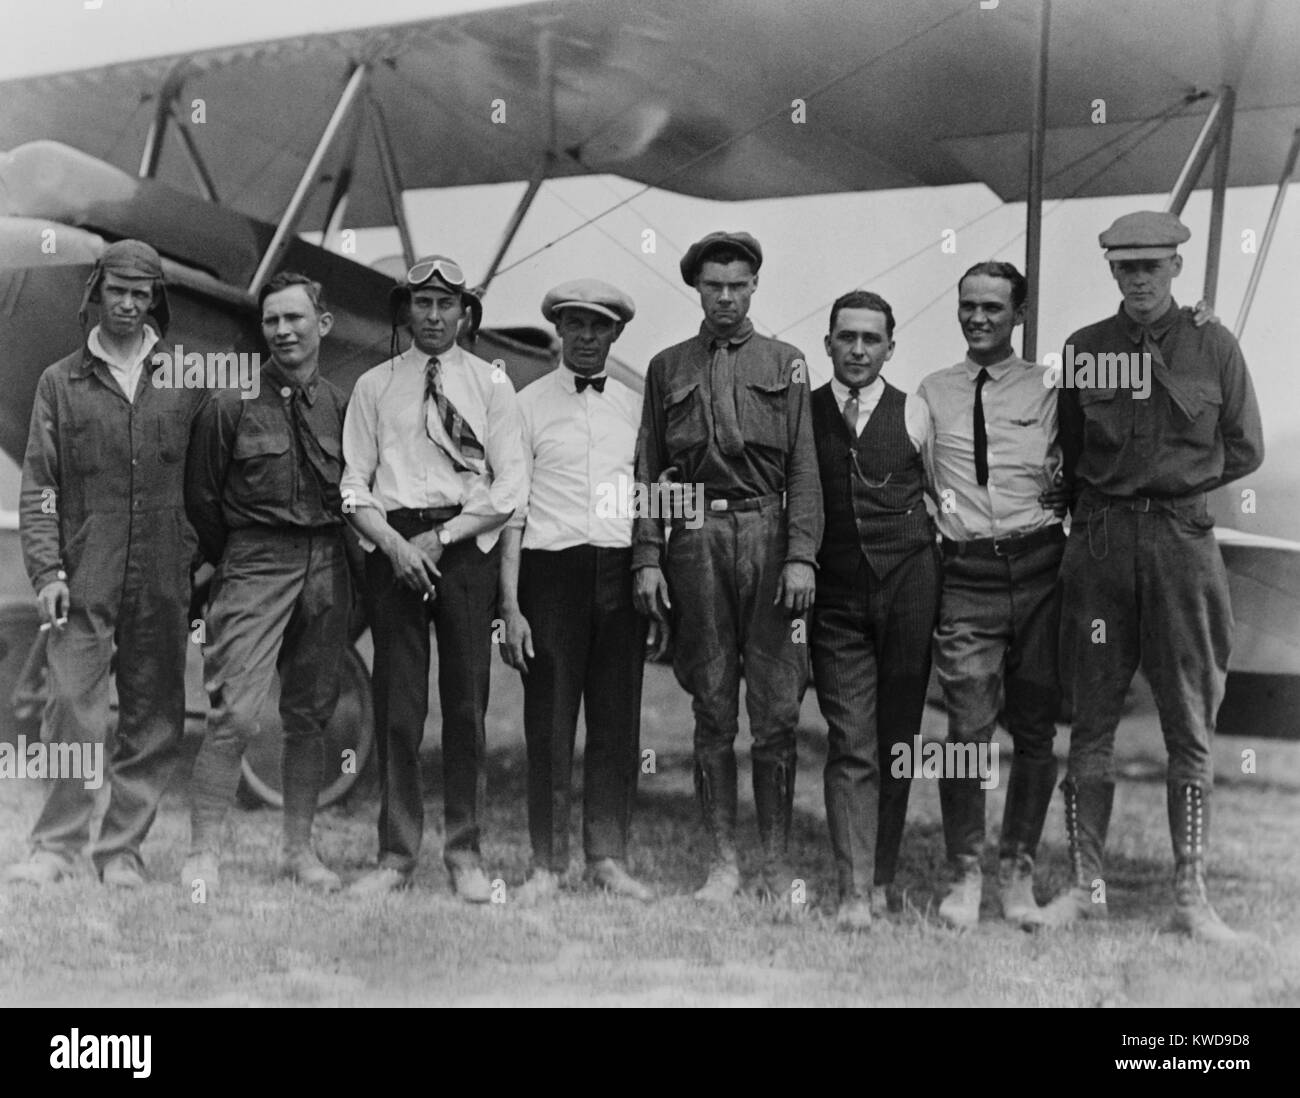 Charles Lindbergh with seven other men, in front of biplane, Lambert-St. Louis Field, 1923. Lindbergh was then a 21 year old flyer attending Air Races, and then decided to remain at Lambert as an instructor (BSLOC_2016_10_147) Stock Photo